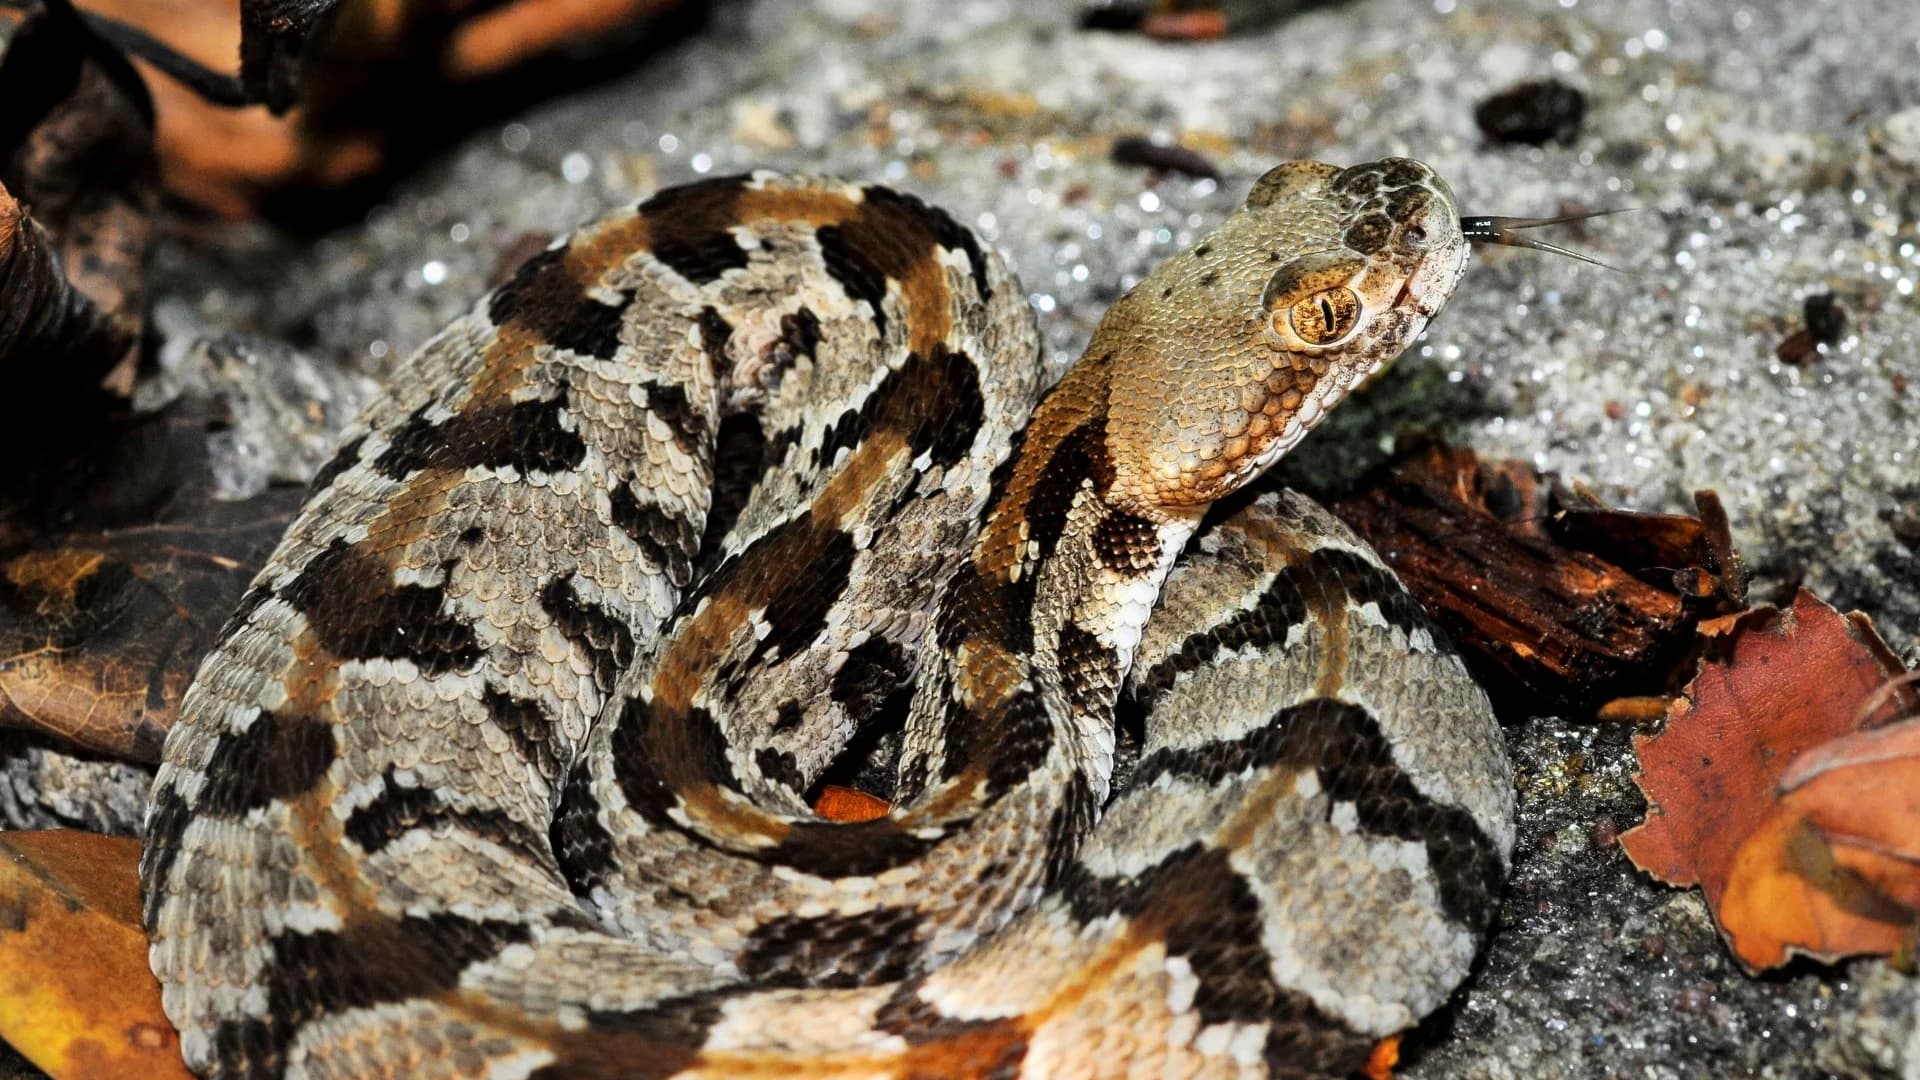 What's Hot: Snake bite killed man who had over 100 snakes at home